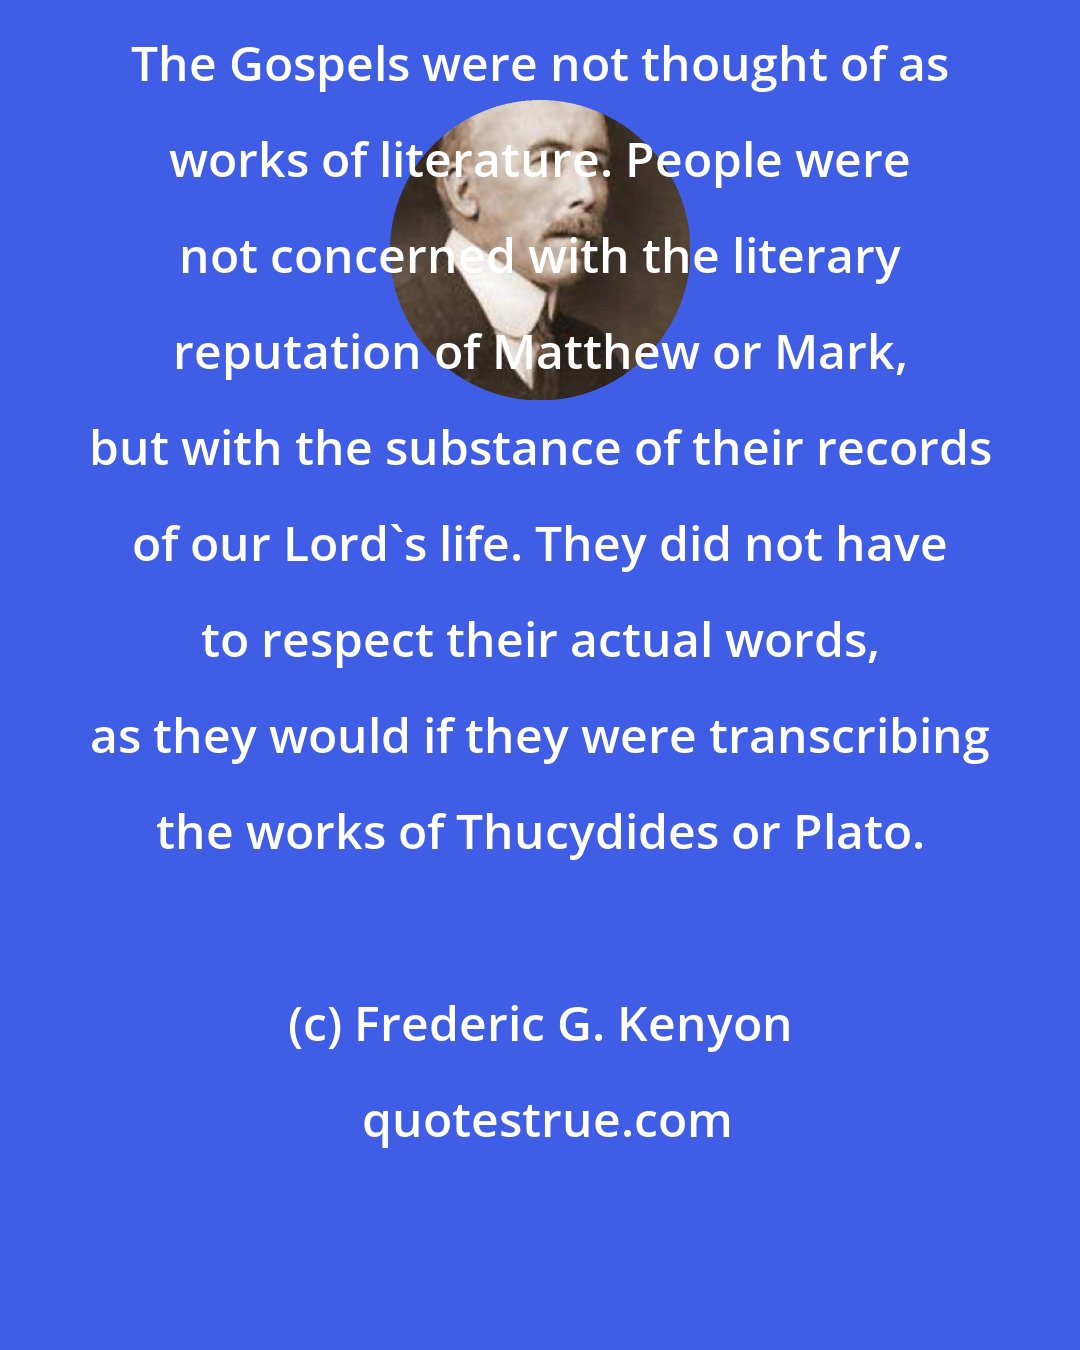 Frederic G. Kenyon: The Gospels were not thought of as works of literature. People were not concerned with the literary reputation of Matthew or Mark, but with the substance of their records of our Lord's life. They did not have to respect their actual words, as they would if they were transcribing the works of Thucydides or Plato.